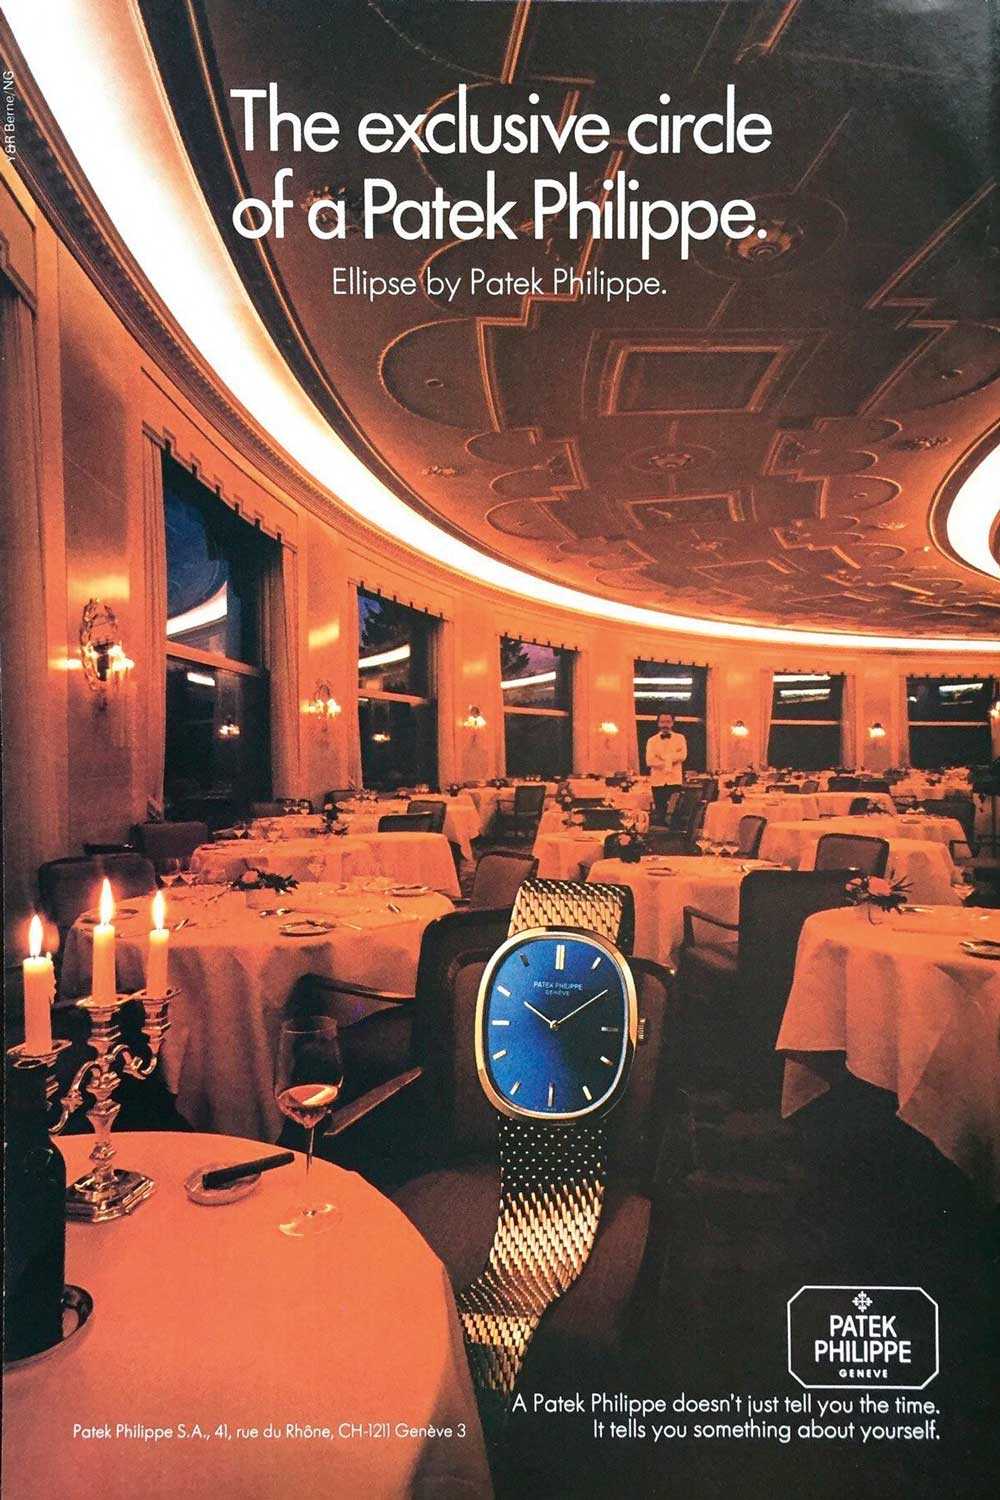 A vintage advertisement for Patek Philippe’s Golden Ellipse from the late 1960s